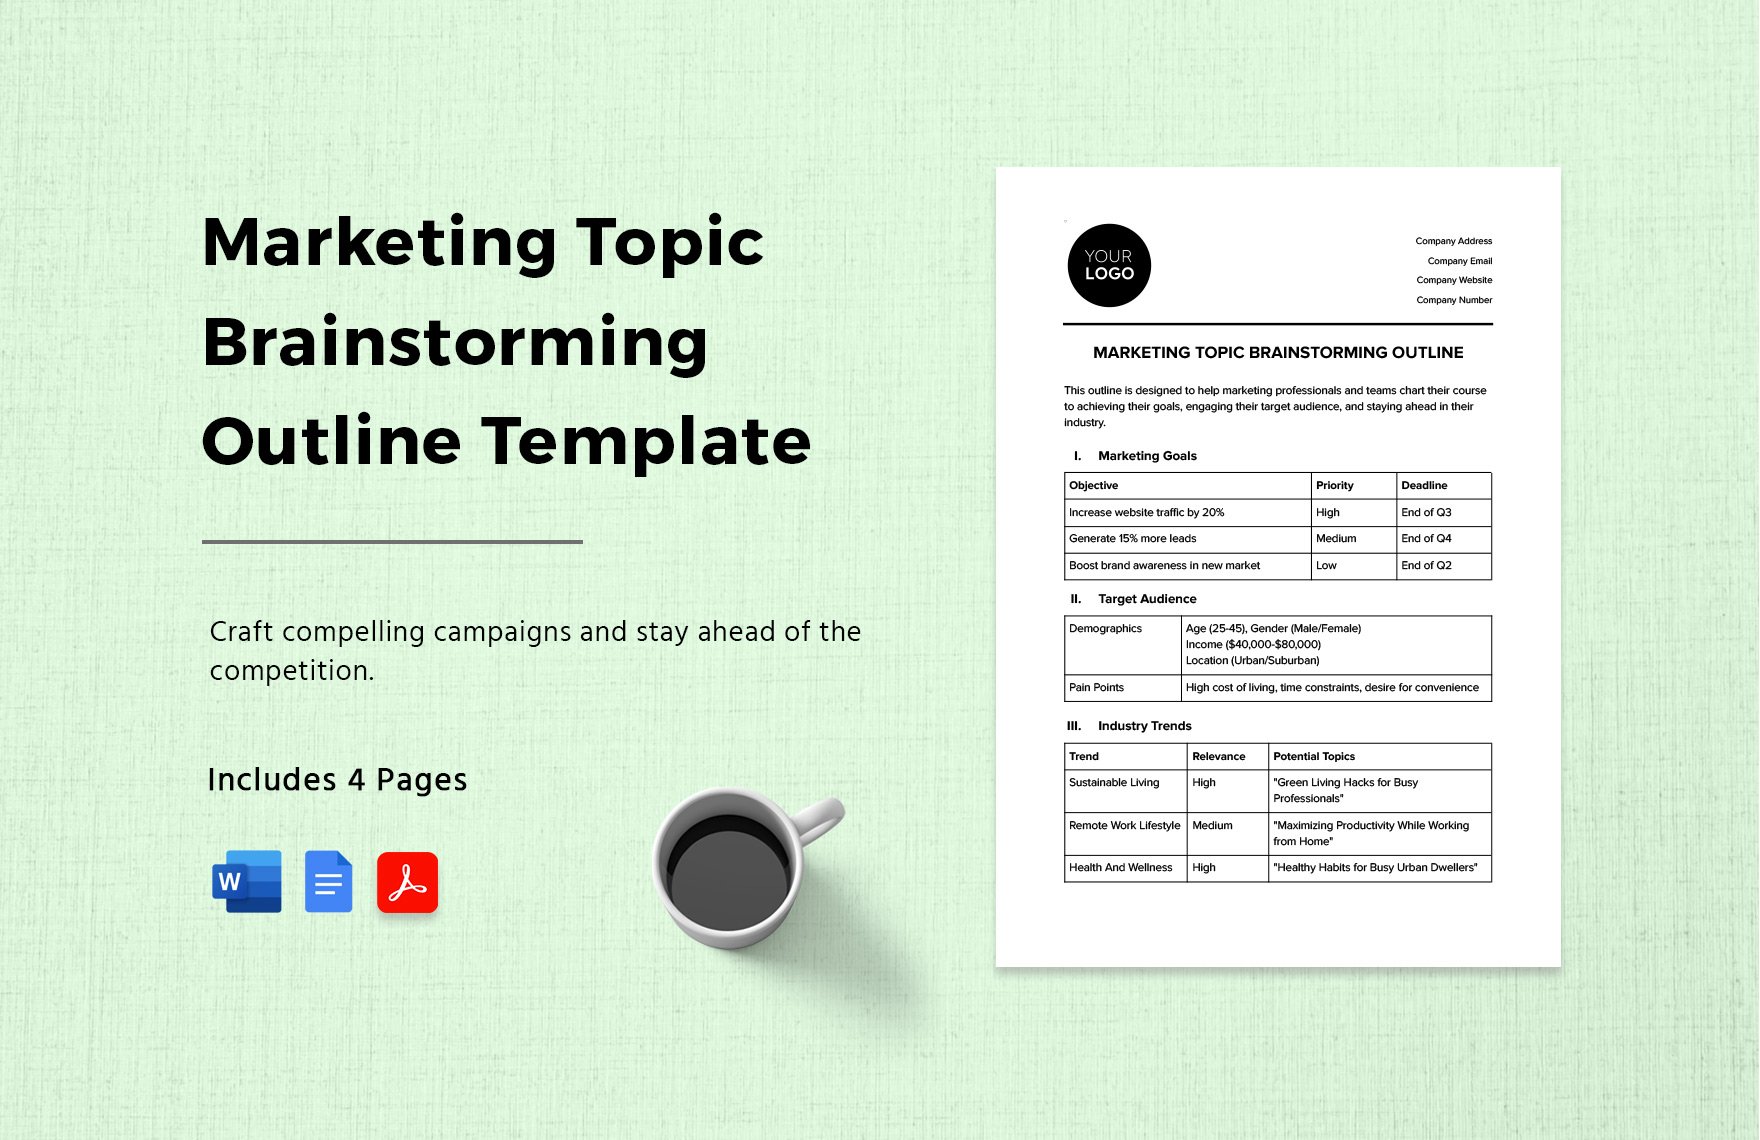  Marketing Topic Brainstorming Outline Template